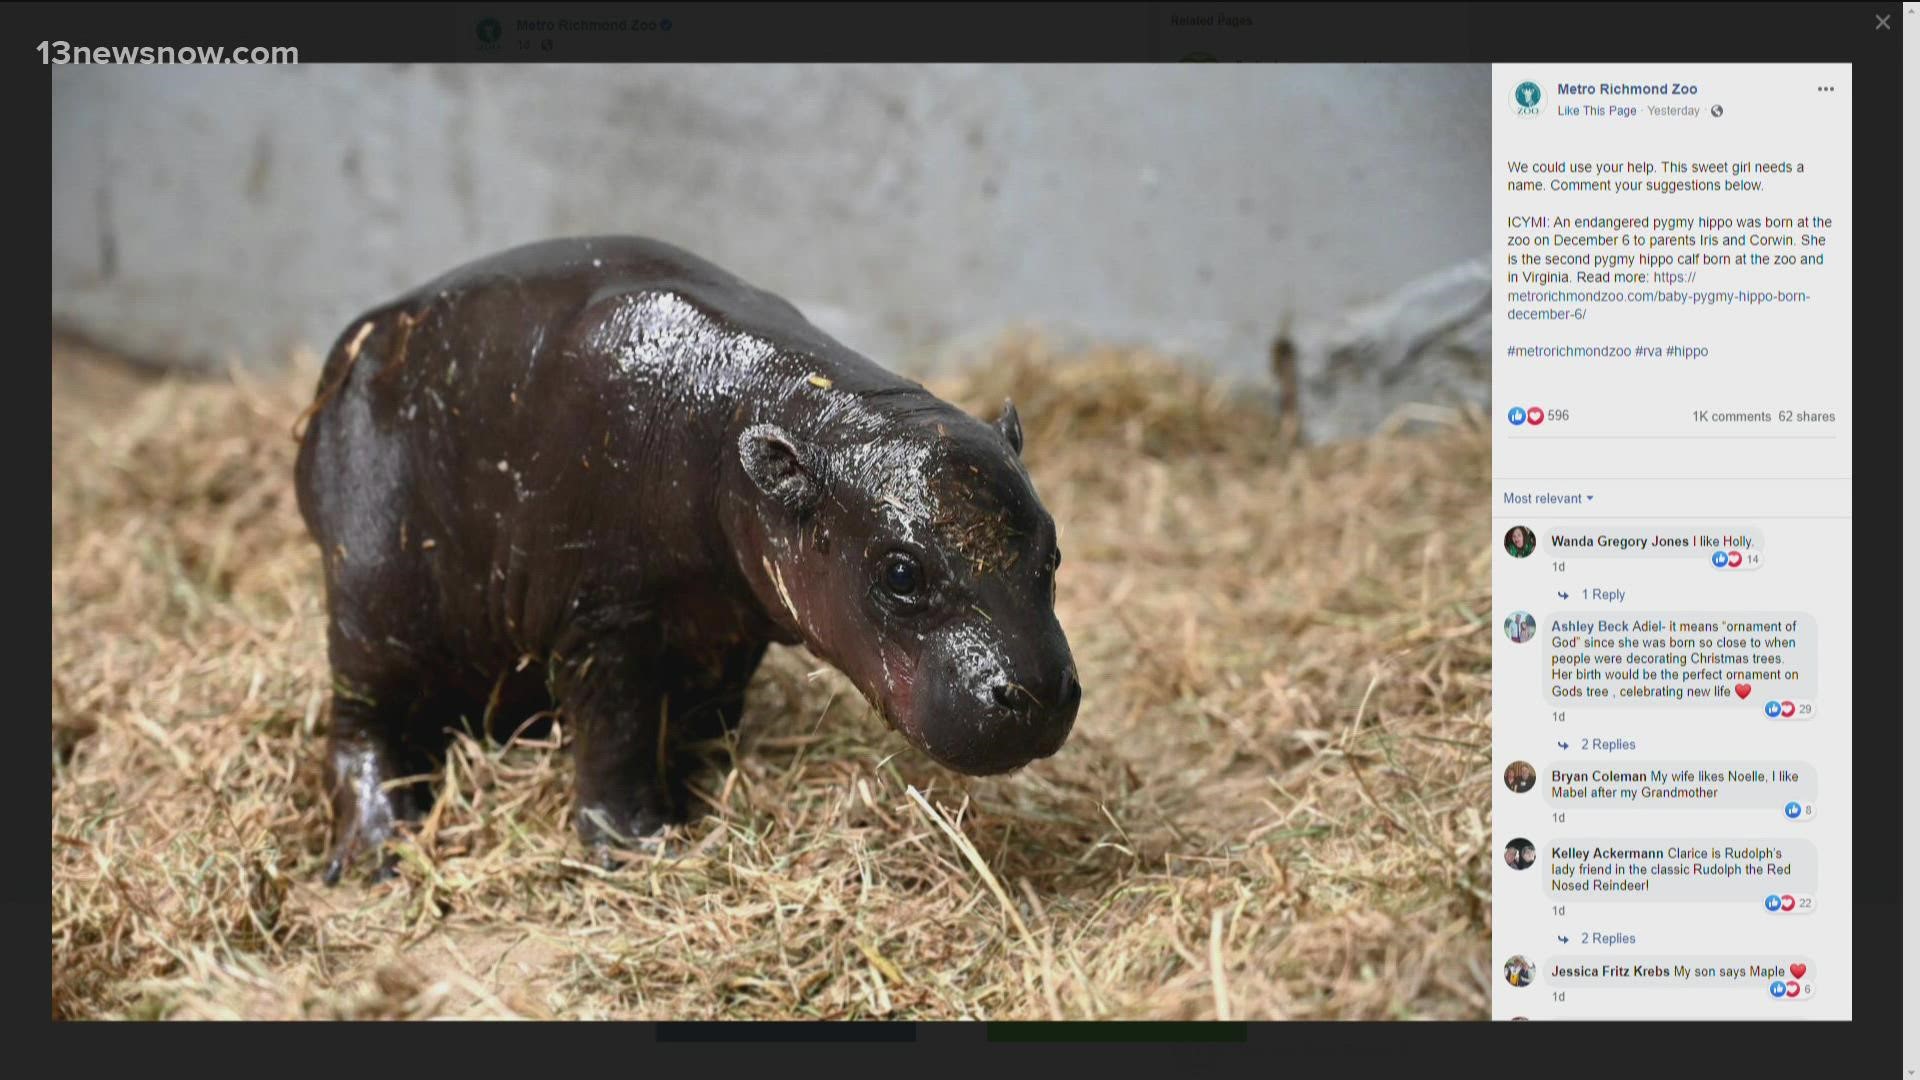 Now, zookeepers need help from the public to name the latest addition: a sweet pygmy hippo.